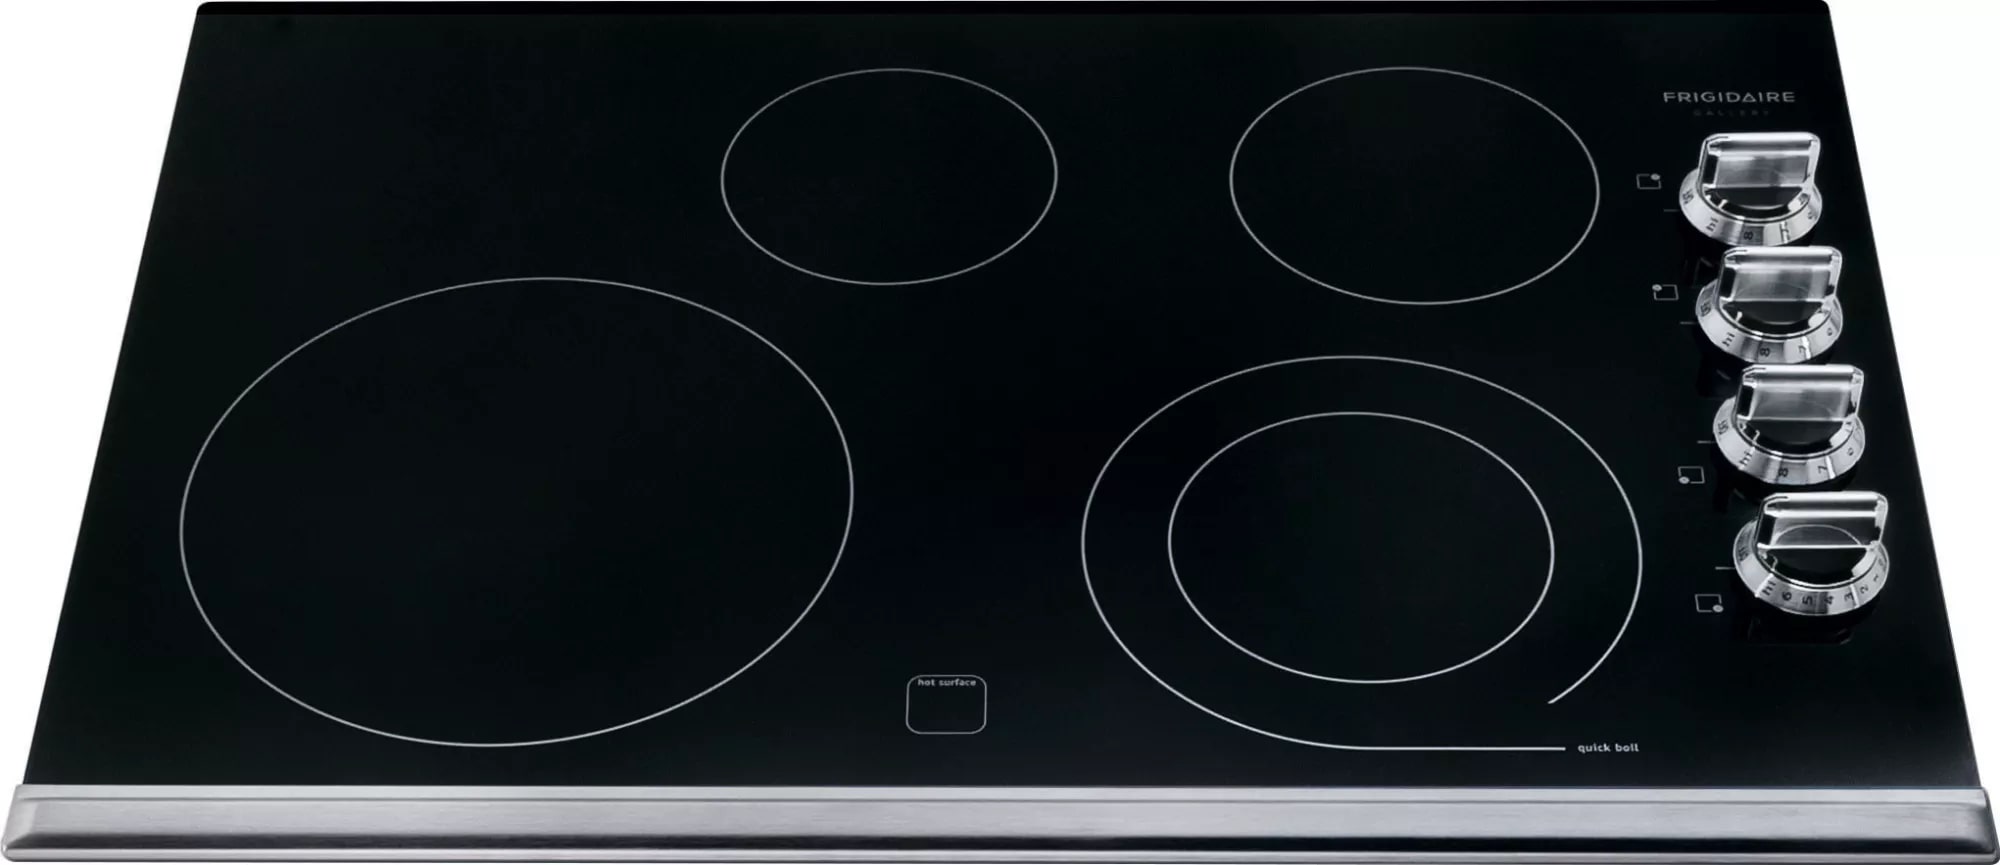 Frigidaire Gallery - 30.375 inch wide Electric Cooktop in Stainless - FGEC3045PS